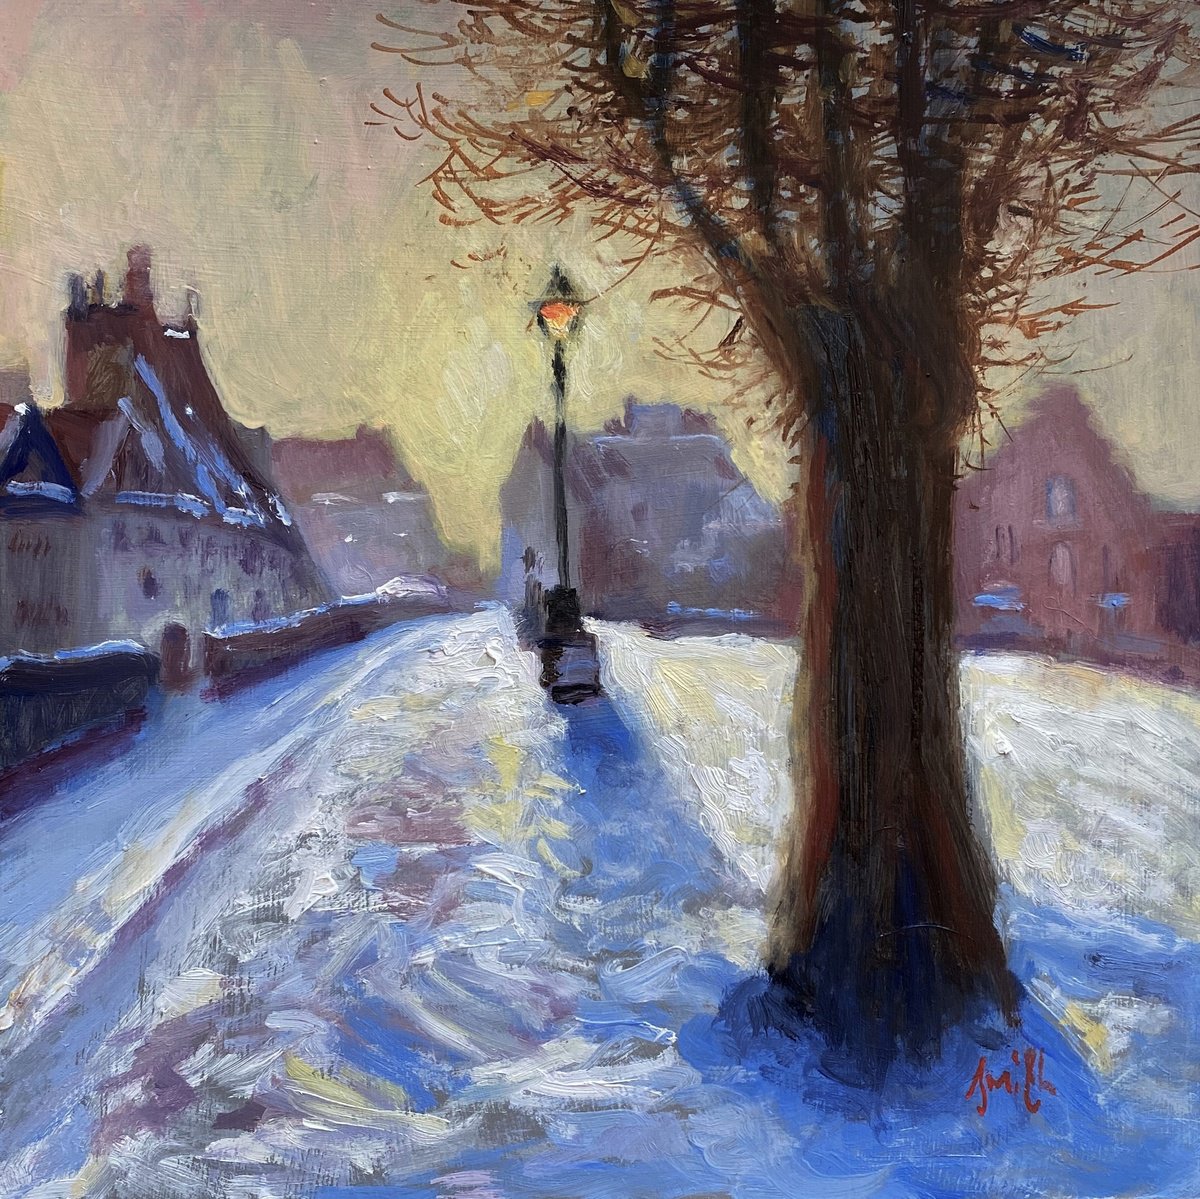 Village in the Winter Snow. by Jackie Smith